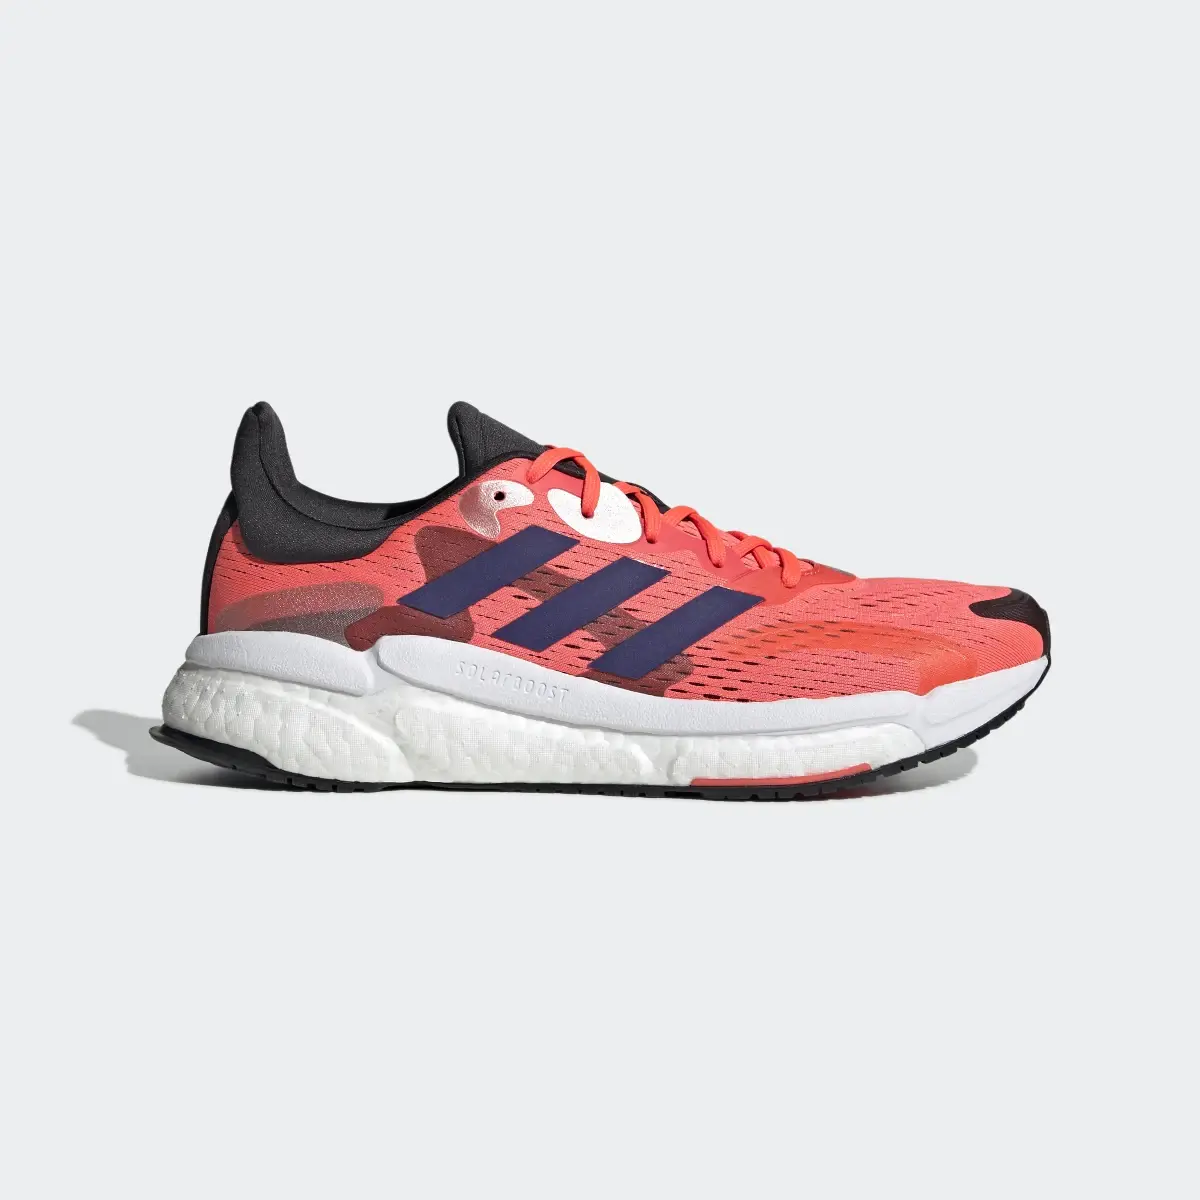 Adidas Solarboost 4 Shoes. 2